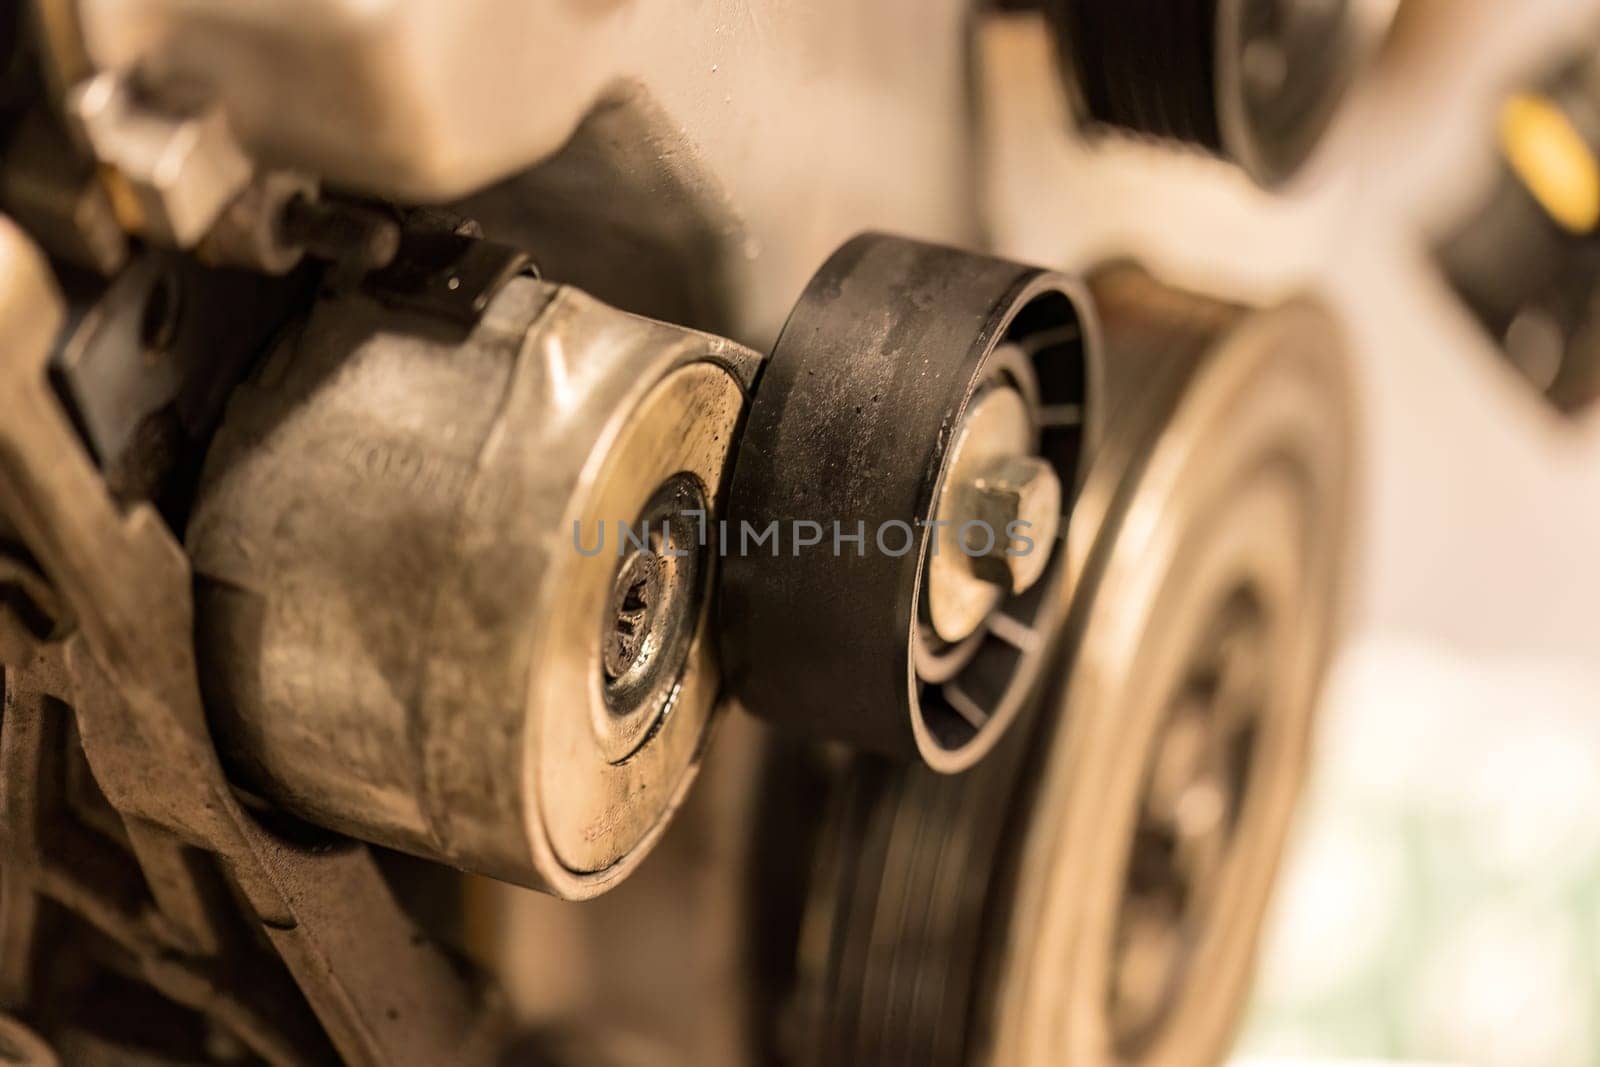 Photo focusing on the intricate pulleys of a car engine, highlighting their essential role in function.